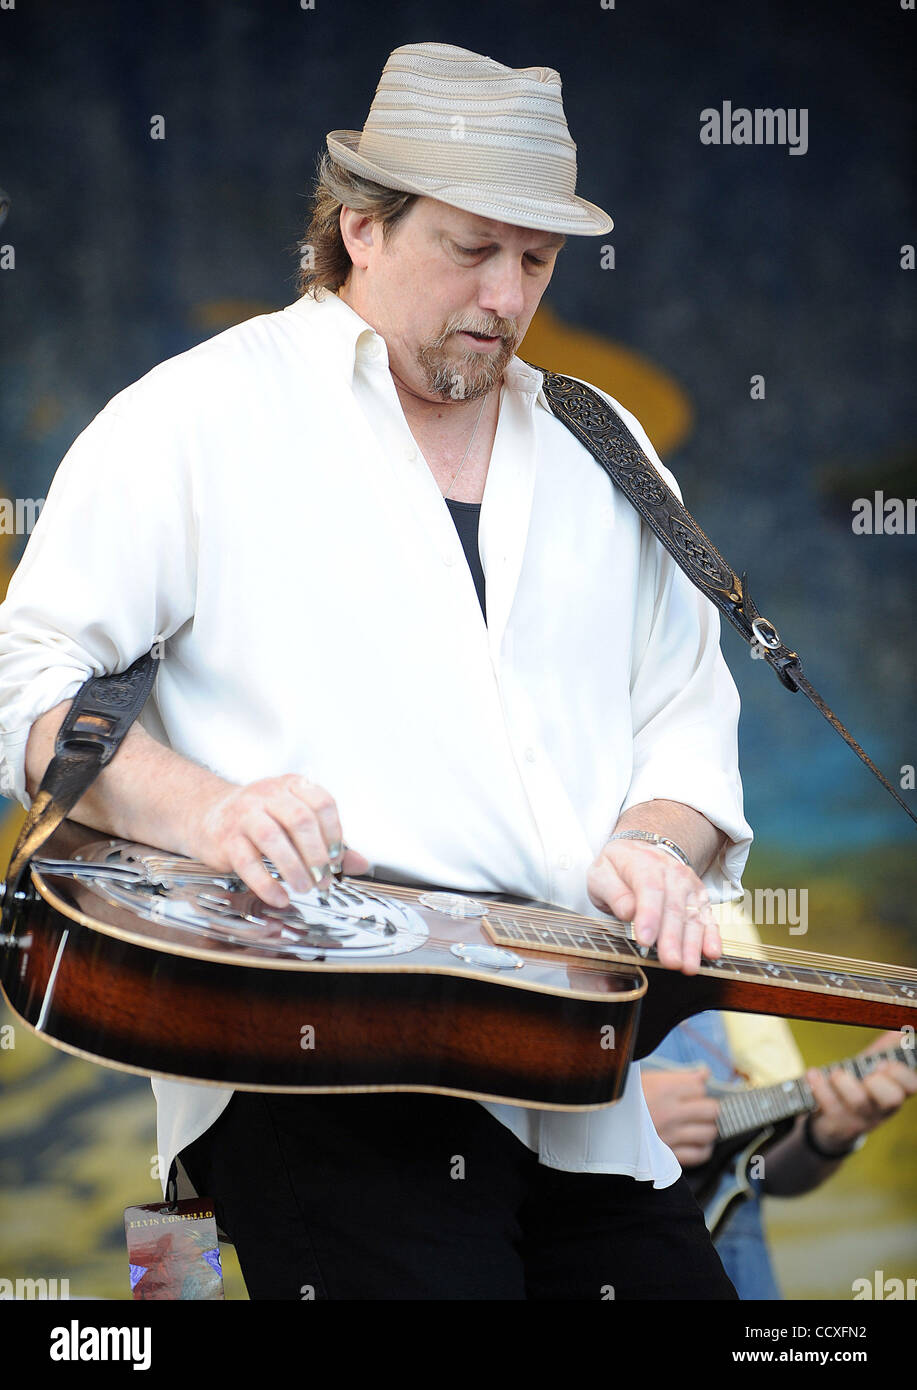 Apr 29, 2010 - New Orleans, Louisiana; USA - Musician JERRY DOUGLAS of the Sugarcanes performs live as part of the 2010 New Orleans Jazz & Heritage Festival that is taking in New Orleans. Copyright 2010 Jason Moore. Stock Photo